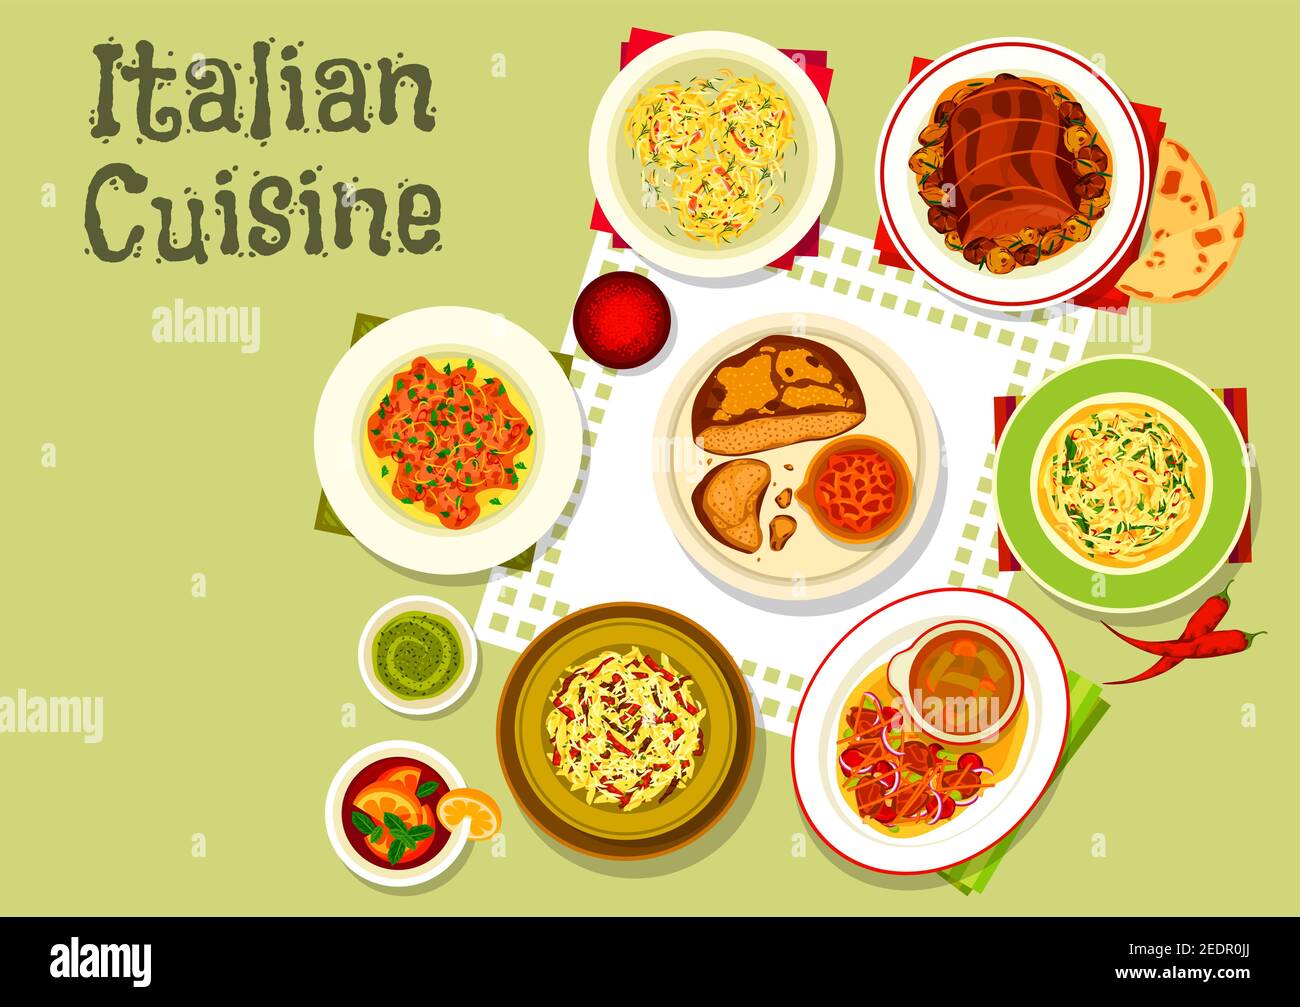 Italian cuisine icon of pasta with salami and pesto sauce, crab pasta nests, spaghetti with cheese and garlic, meat bread with chilli, vegetable beef Stock Vector